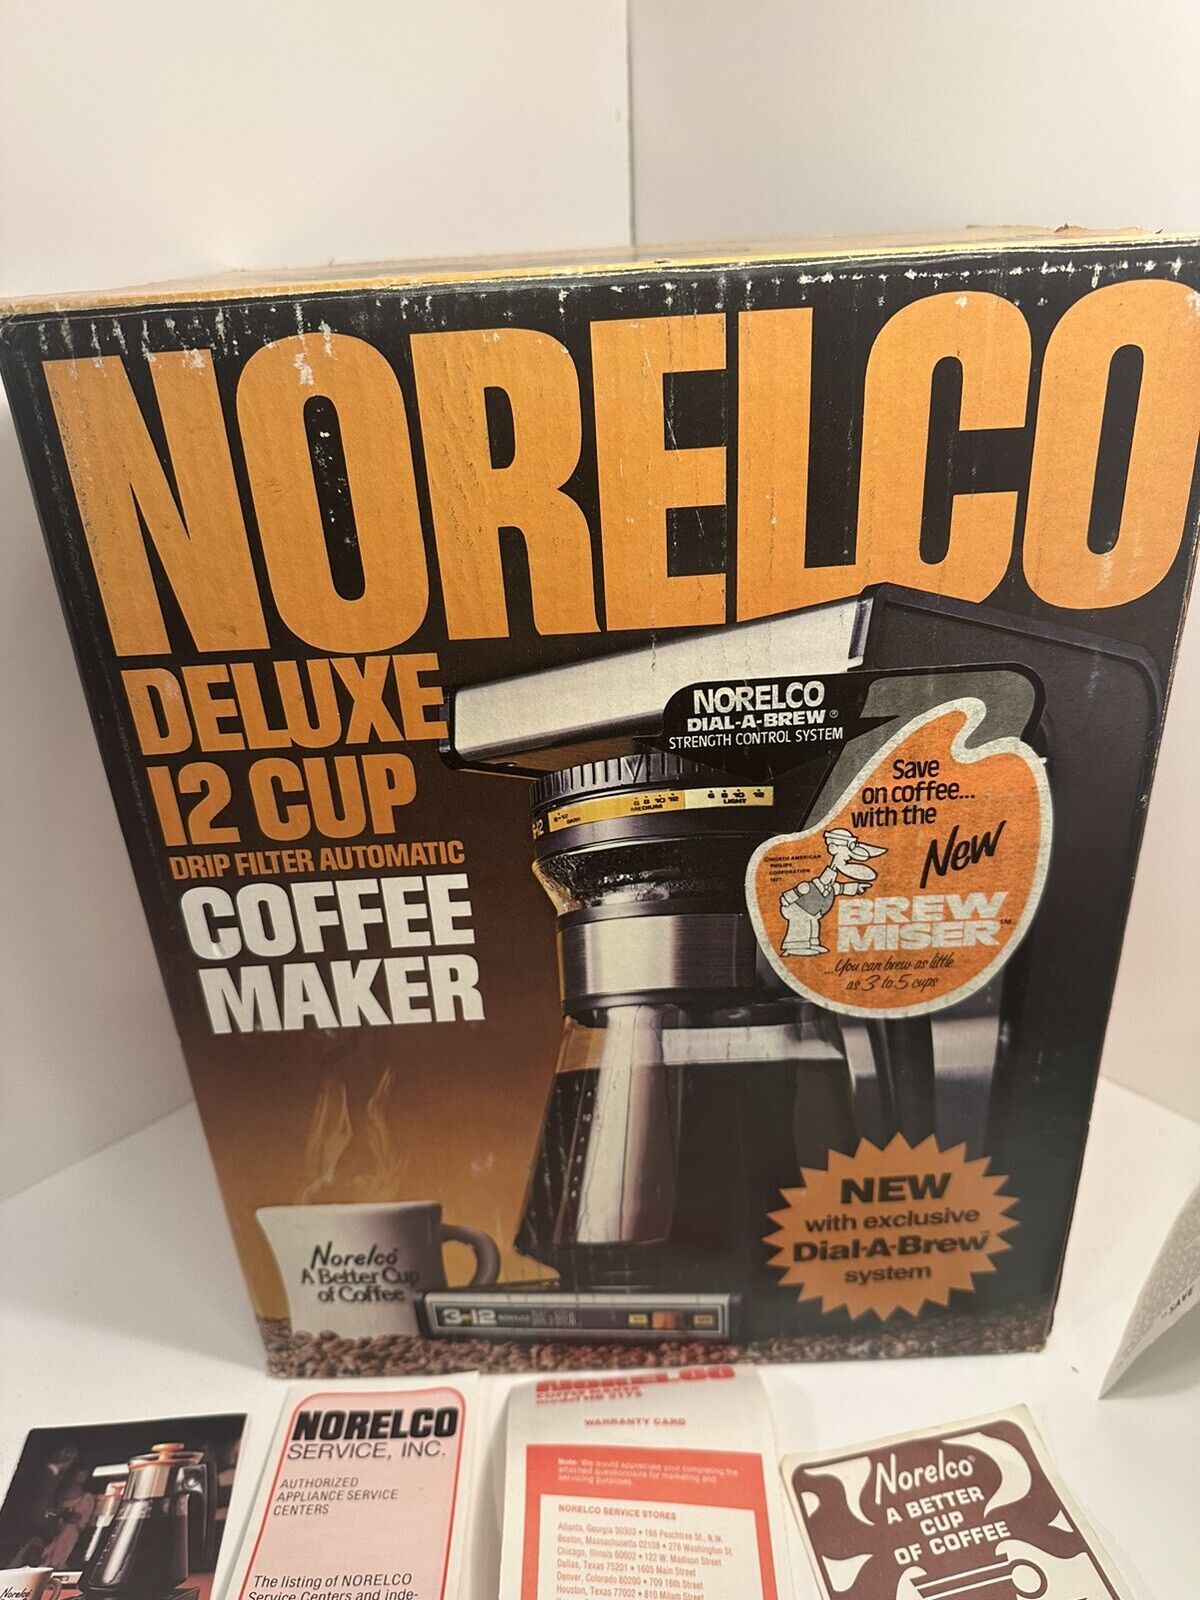 Vtg Norelco Coffee Maker drip Dial-a-Brew dial a brew HB 5150 12 cup